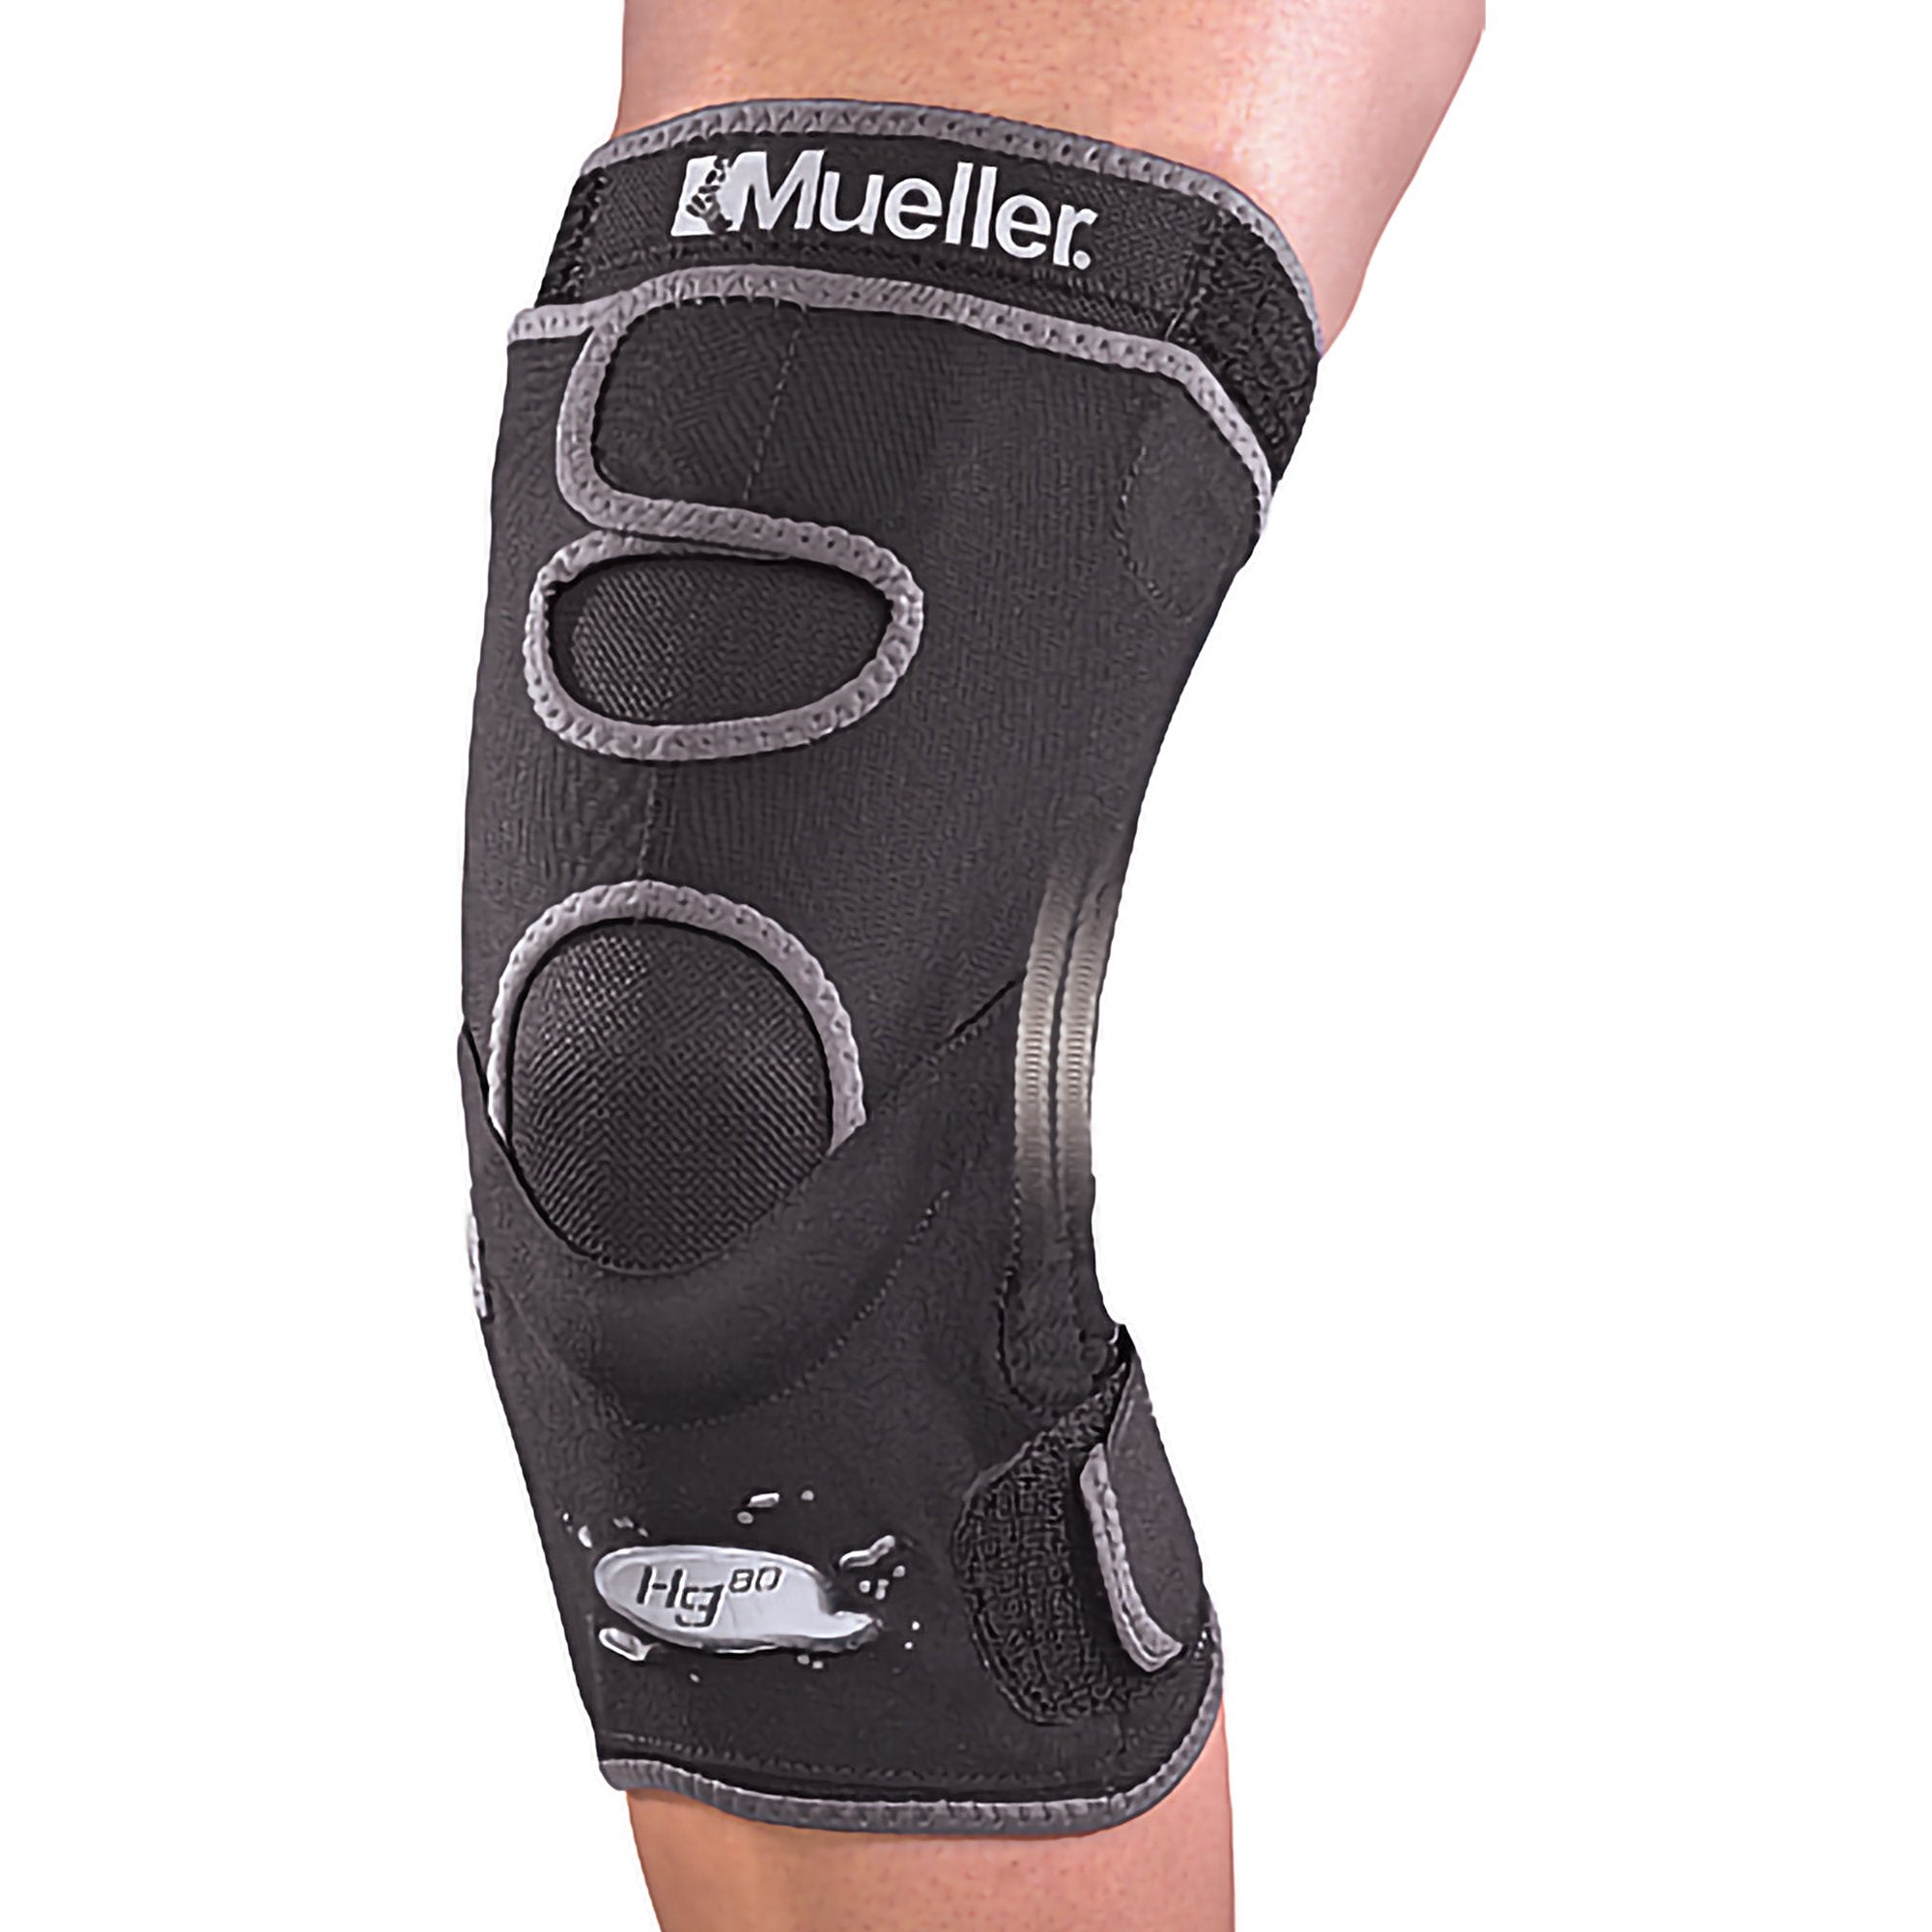 Knee Brace Hg80® Medium Pull-On / Hook and Loop Strap 14 to 16 Inch Knee Circumference Left or Right Knee